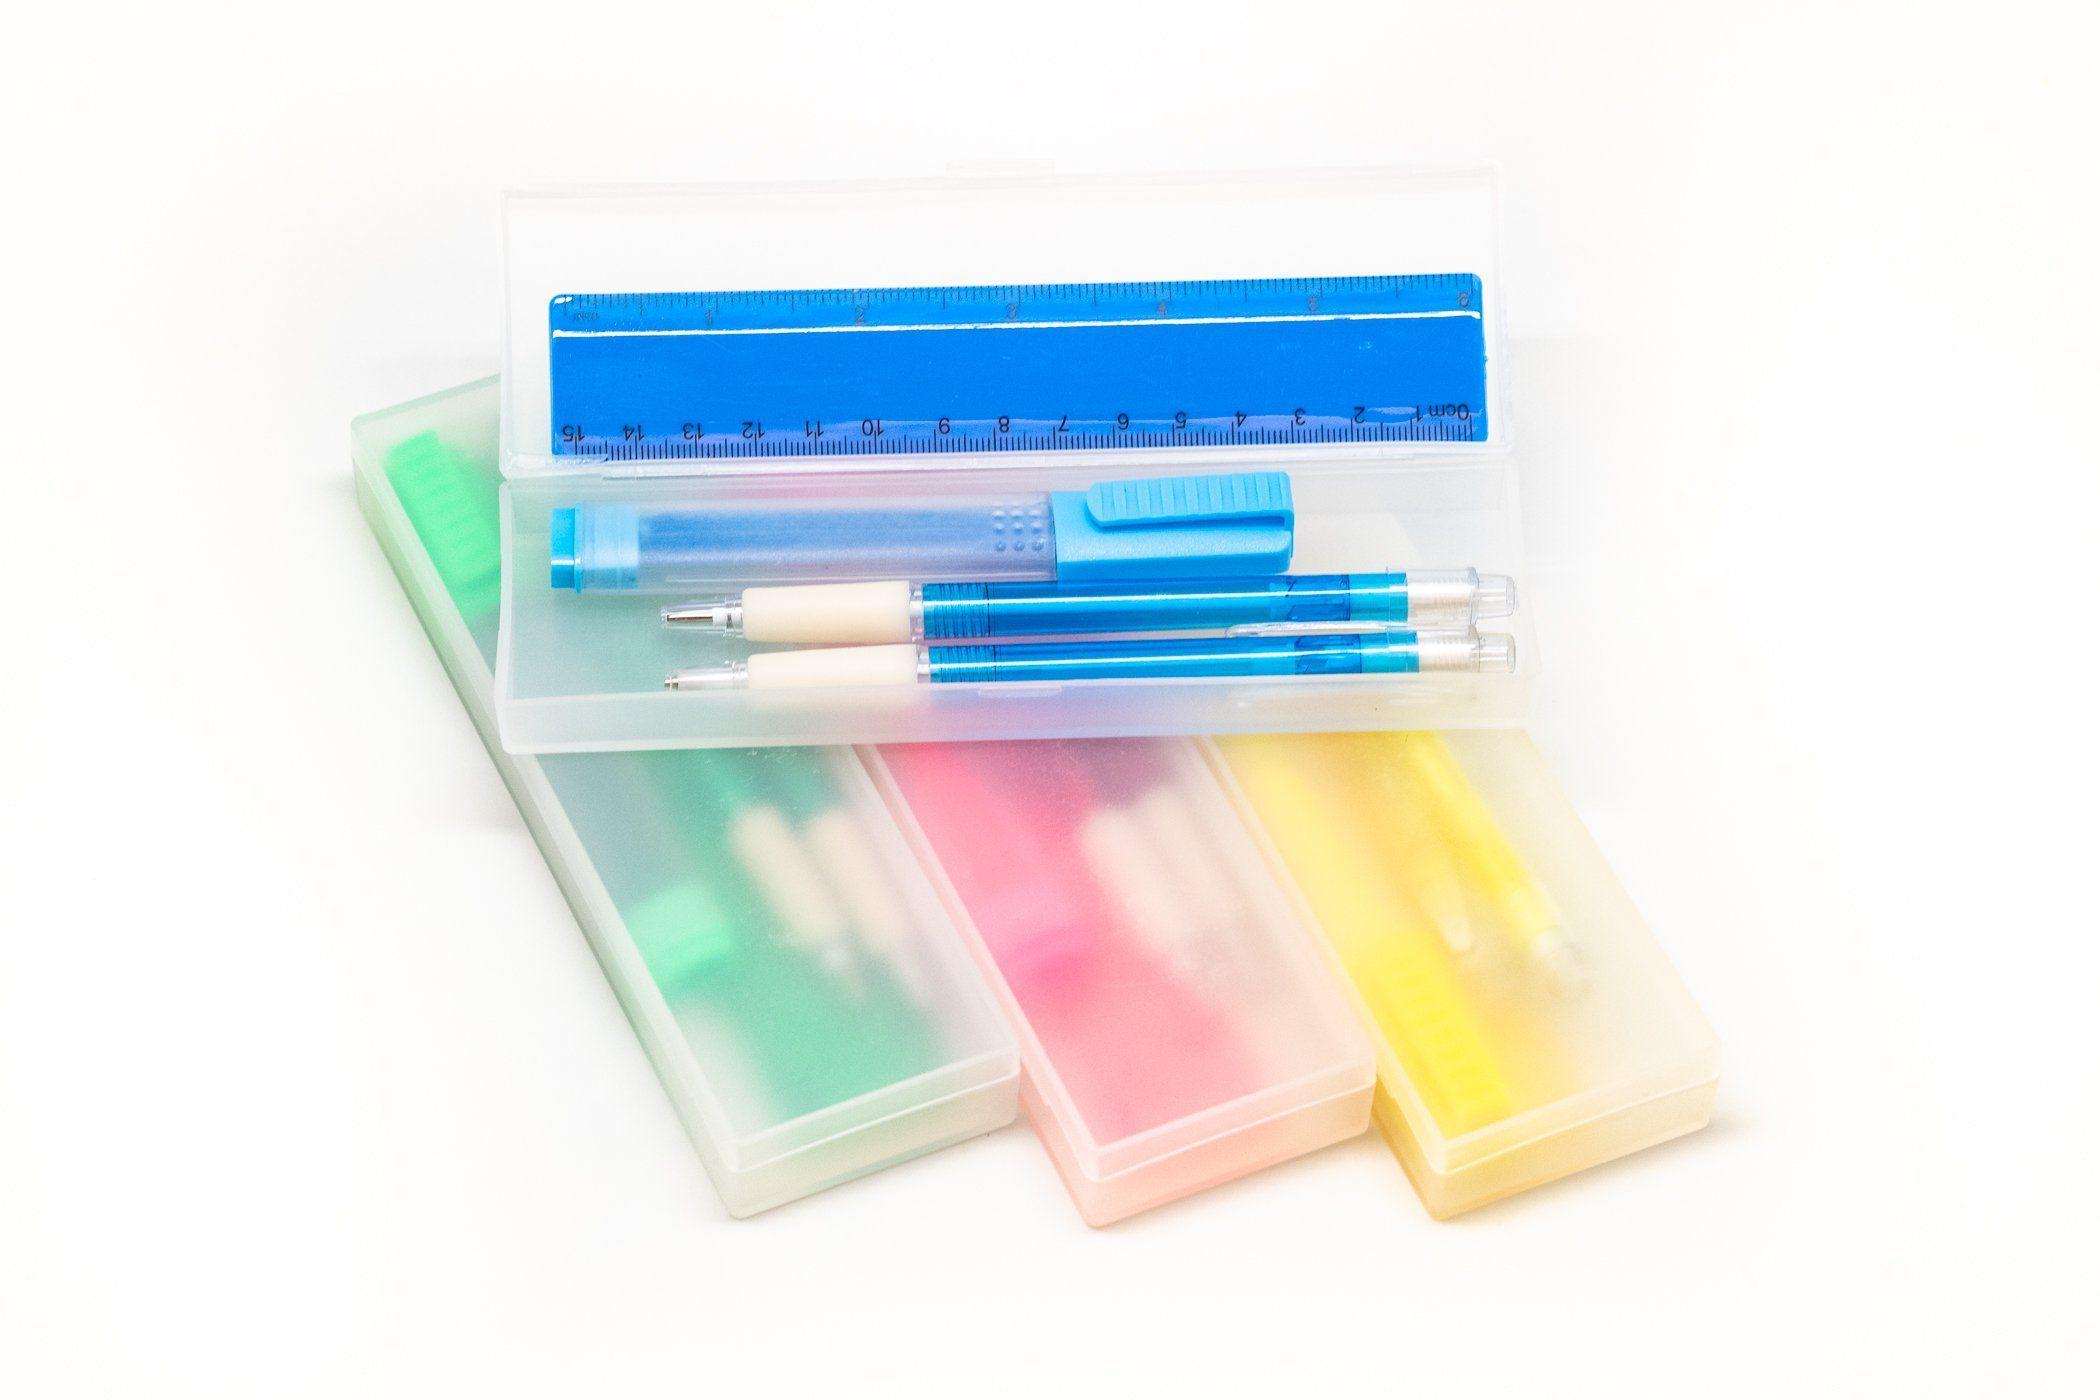 4 PCS GEL Pen Case Heaven and Earth Cover Gift Card Boxes for Presents  $17.45 - PicClick AU